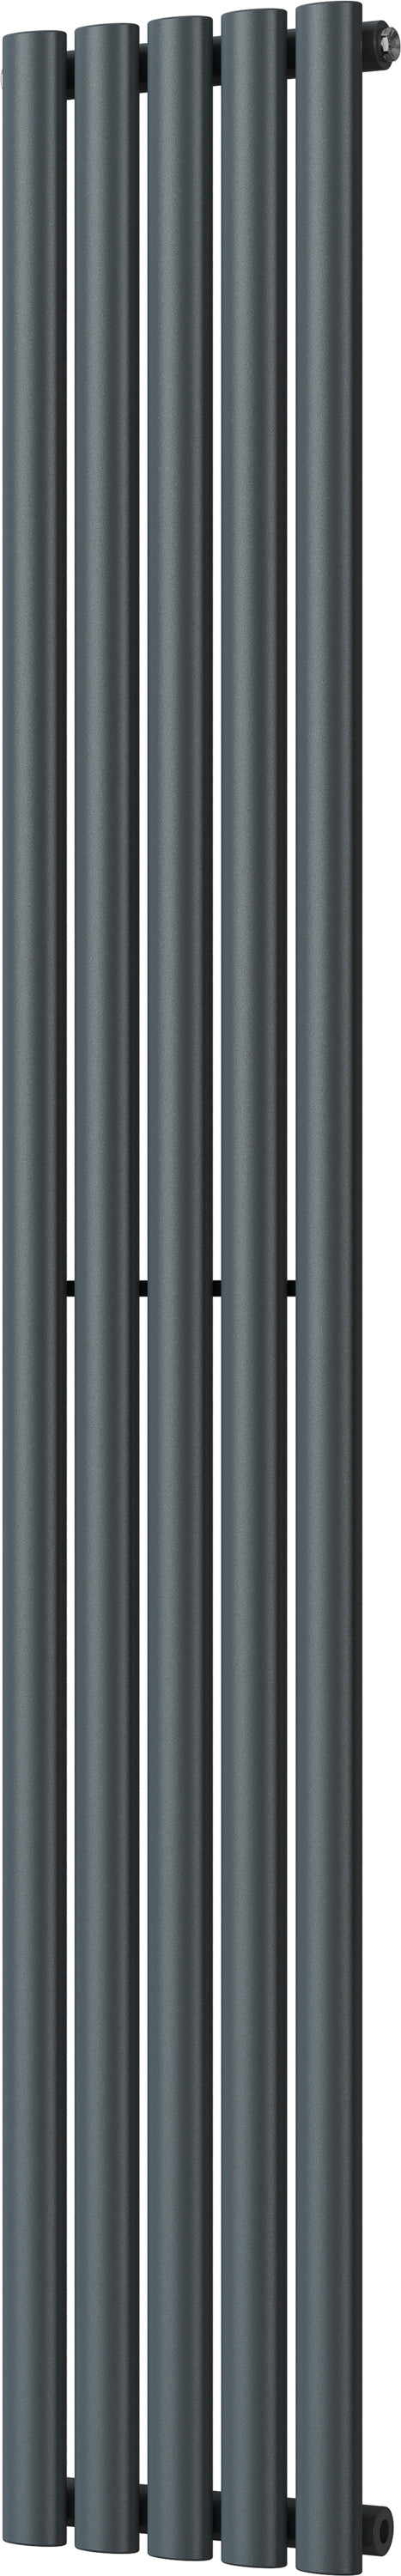 Omeara - Anthracite Vertical Radiator H1800mm x W290mm Single Panel